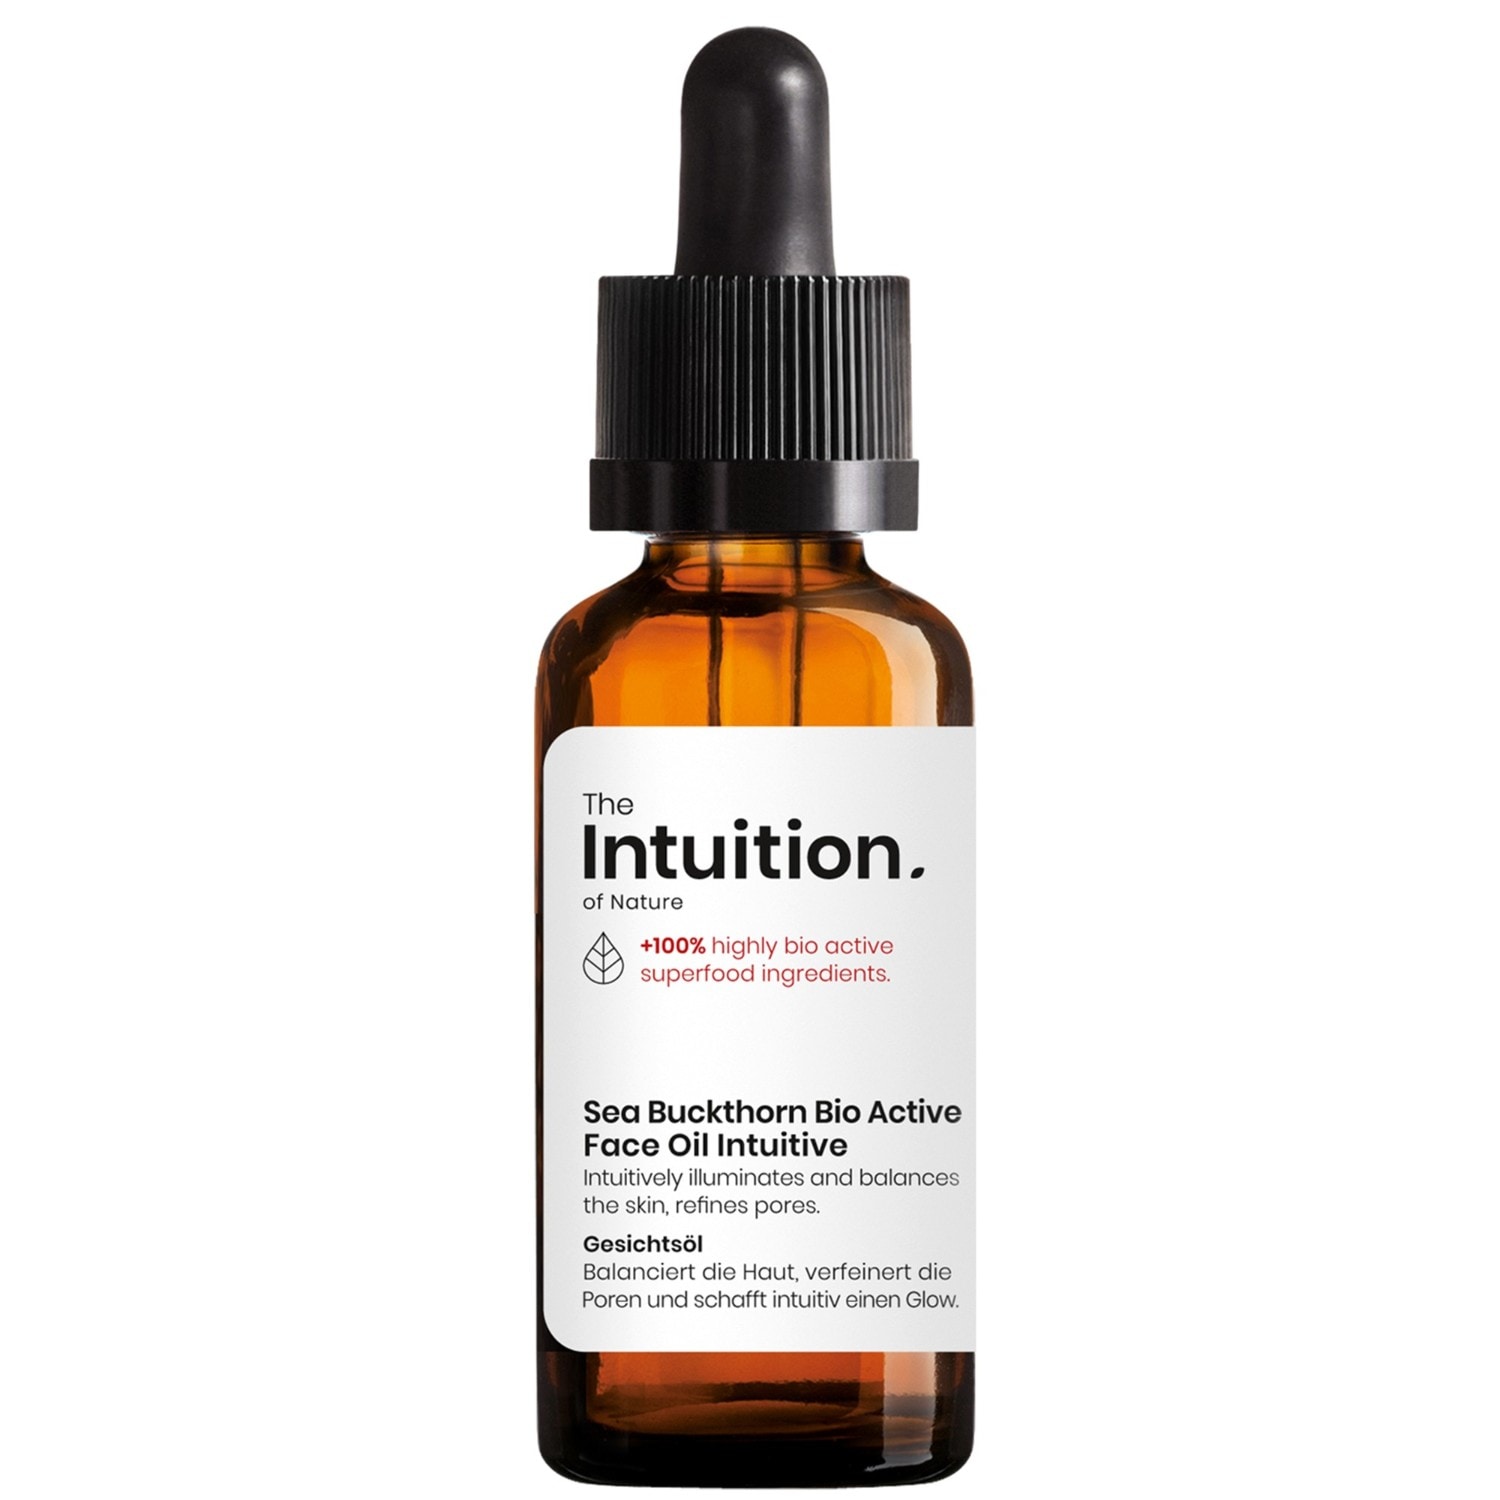 The Intuition Of Nature Sea Buckthorn Bio Active Face Oil Intuitive